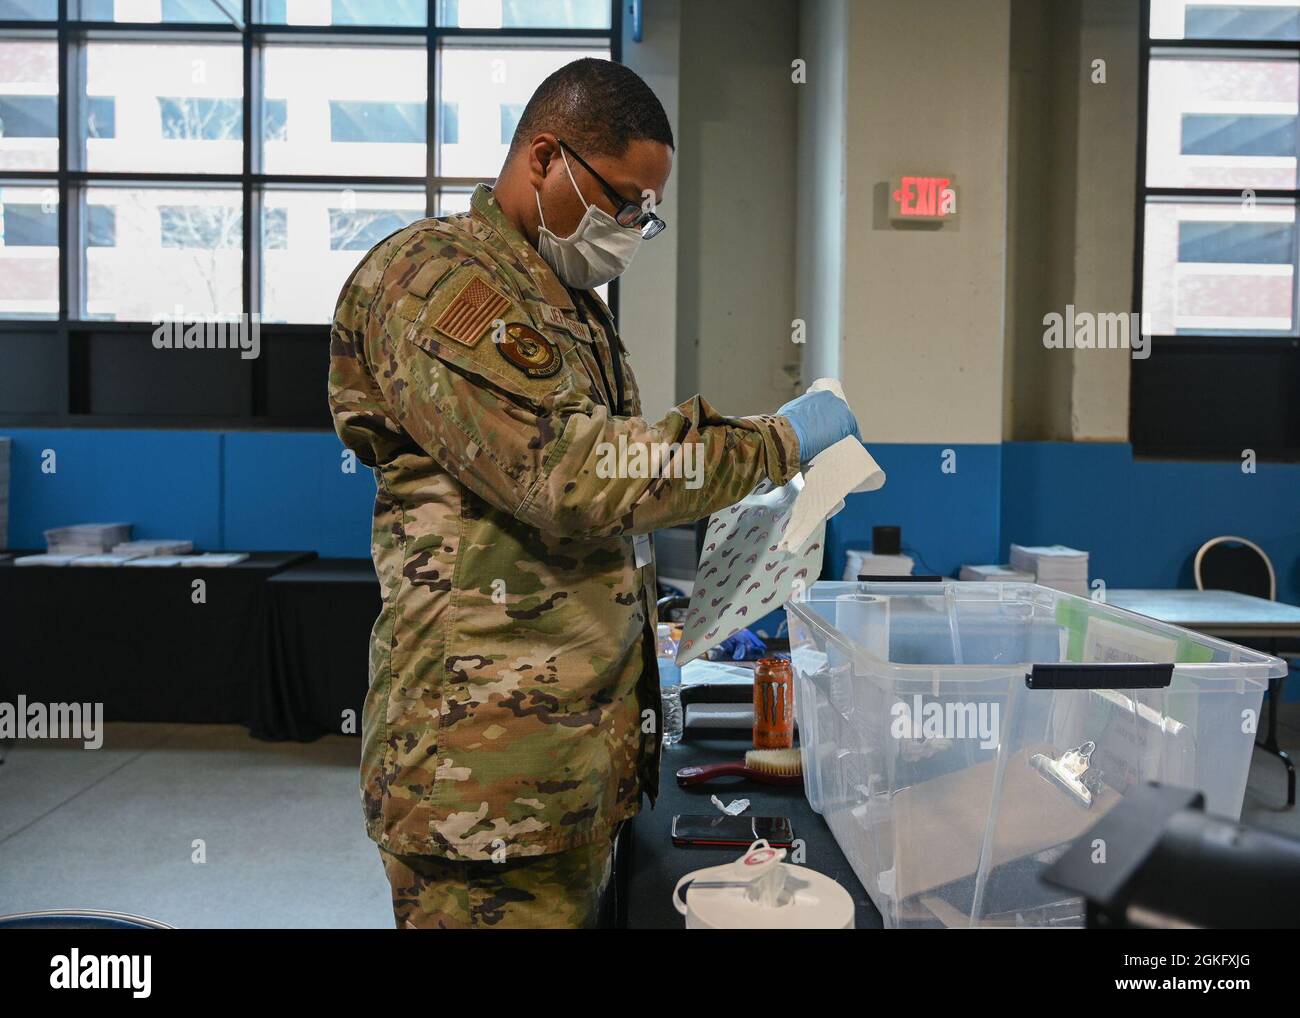 U.S. Air Force Senior Airman Dante Jefferson, a Hampton, Virginia, native and aerospace ground equipment mechanic with the 2nd Maintenance Squadron, 2nd Bomb Wing stationed at Barksdale Air Force Base, Louisiana, sanitizes clipboards for community members at the state-led, federally-supported Ford Field COVID-19 Community Vaccination Center in Detroit, April 12, 2021. Jefferson is part of a group of Airmen assigned to 1st Detachment, 64th Air Expeditionary Group that are assisting with the vaccination efforts. Jefferson is ready to provide a helping hand to the community of Detroit, especially Stock Photo